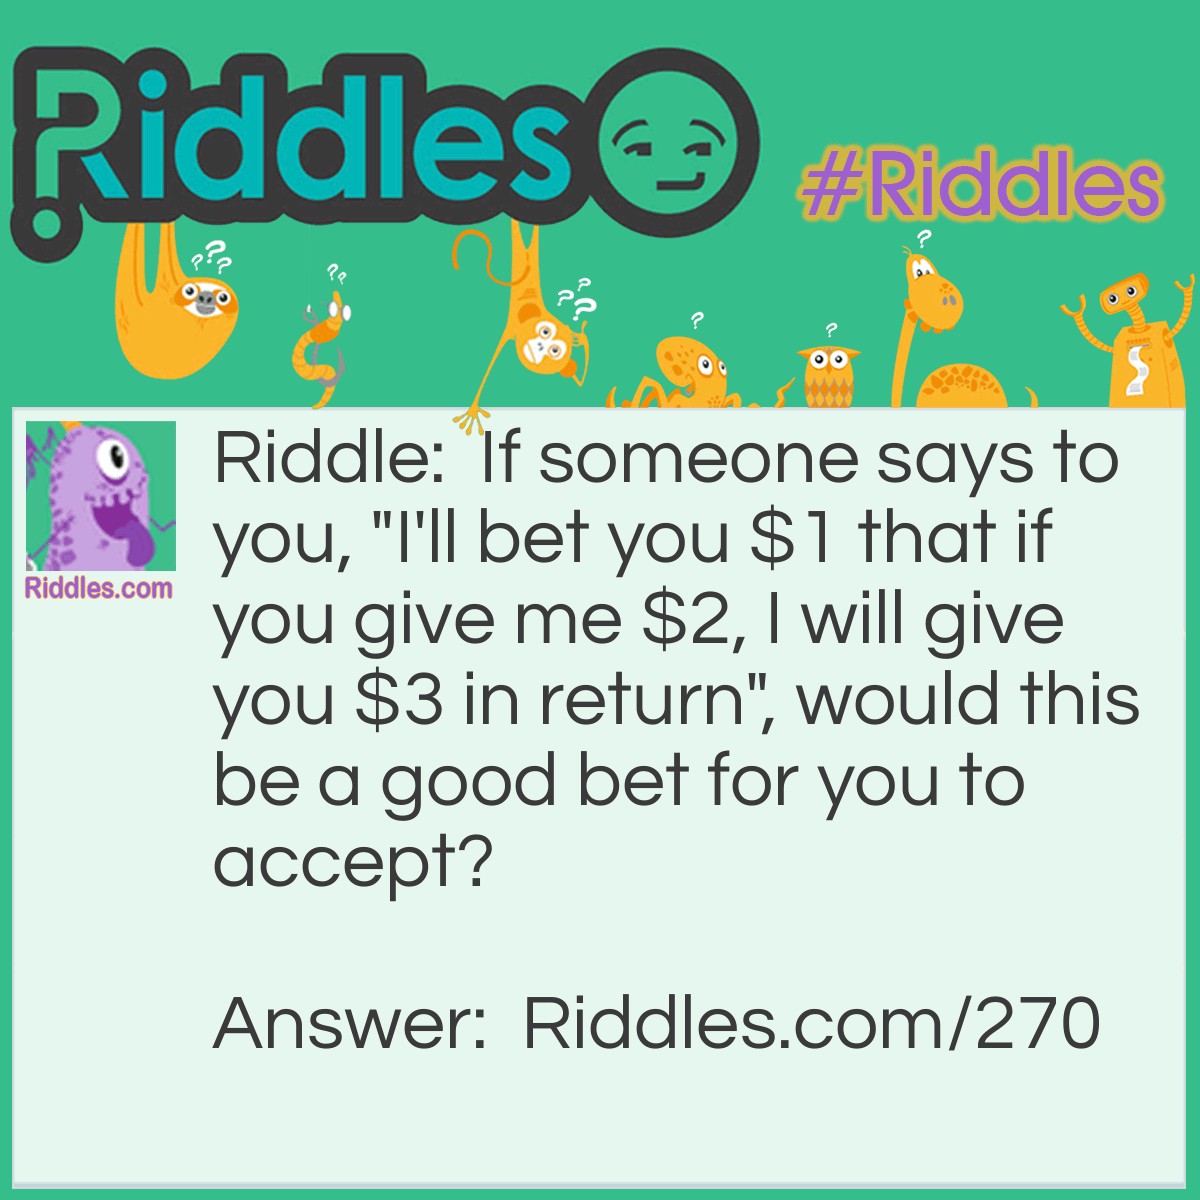 Riddle: If someone says to you, "I'll bet you $1 that if you give me $2, I will give you $3 in return", would this be a good bet for you to accept? Answer: No. This is a situation where you lose even if you win. Assuming the other person is being wise, they would take your $2 and say, "I lose", and give you $1 in return. You win the bet, but you're out $1.